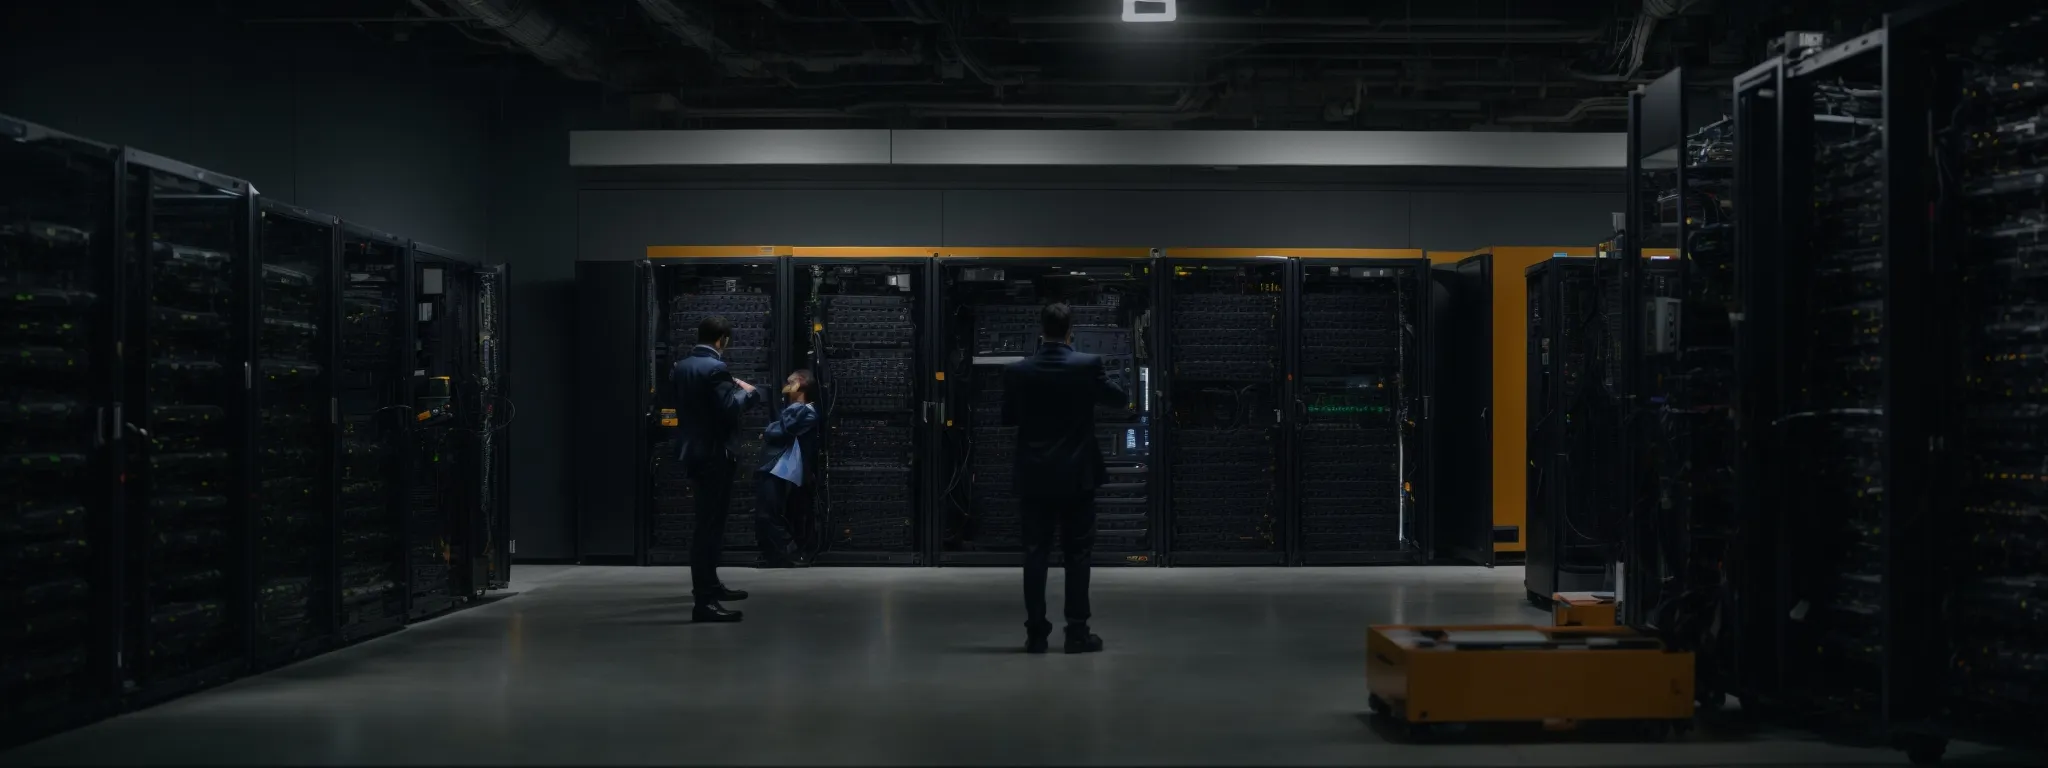 a team of professionals is configuring a secure server rack in a data center.